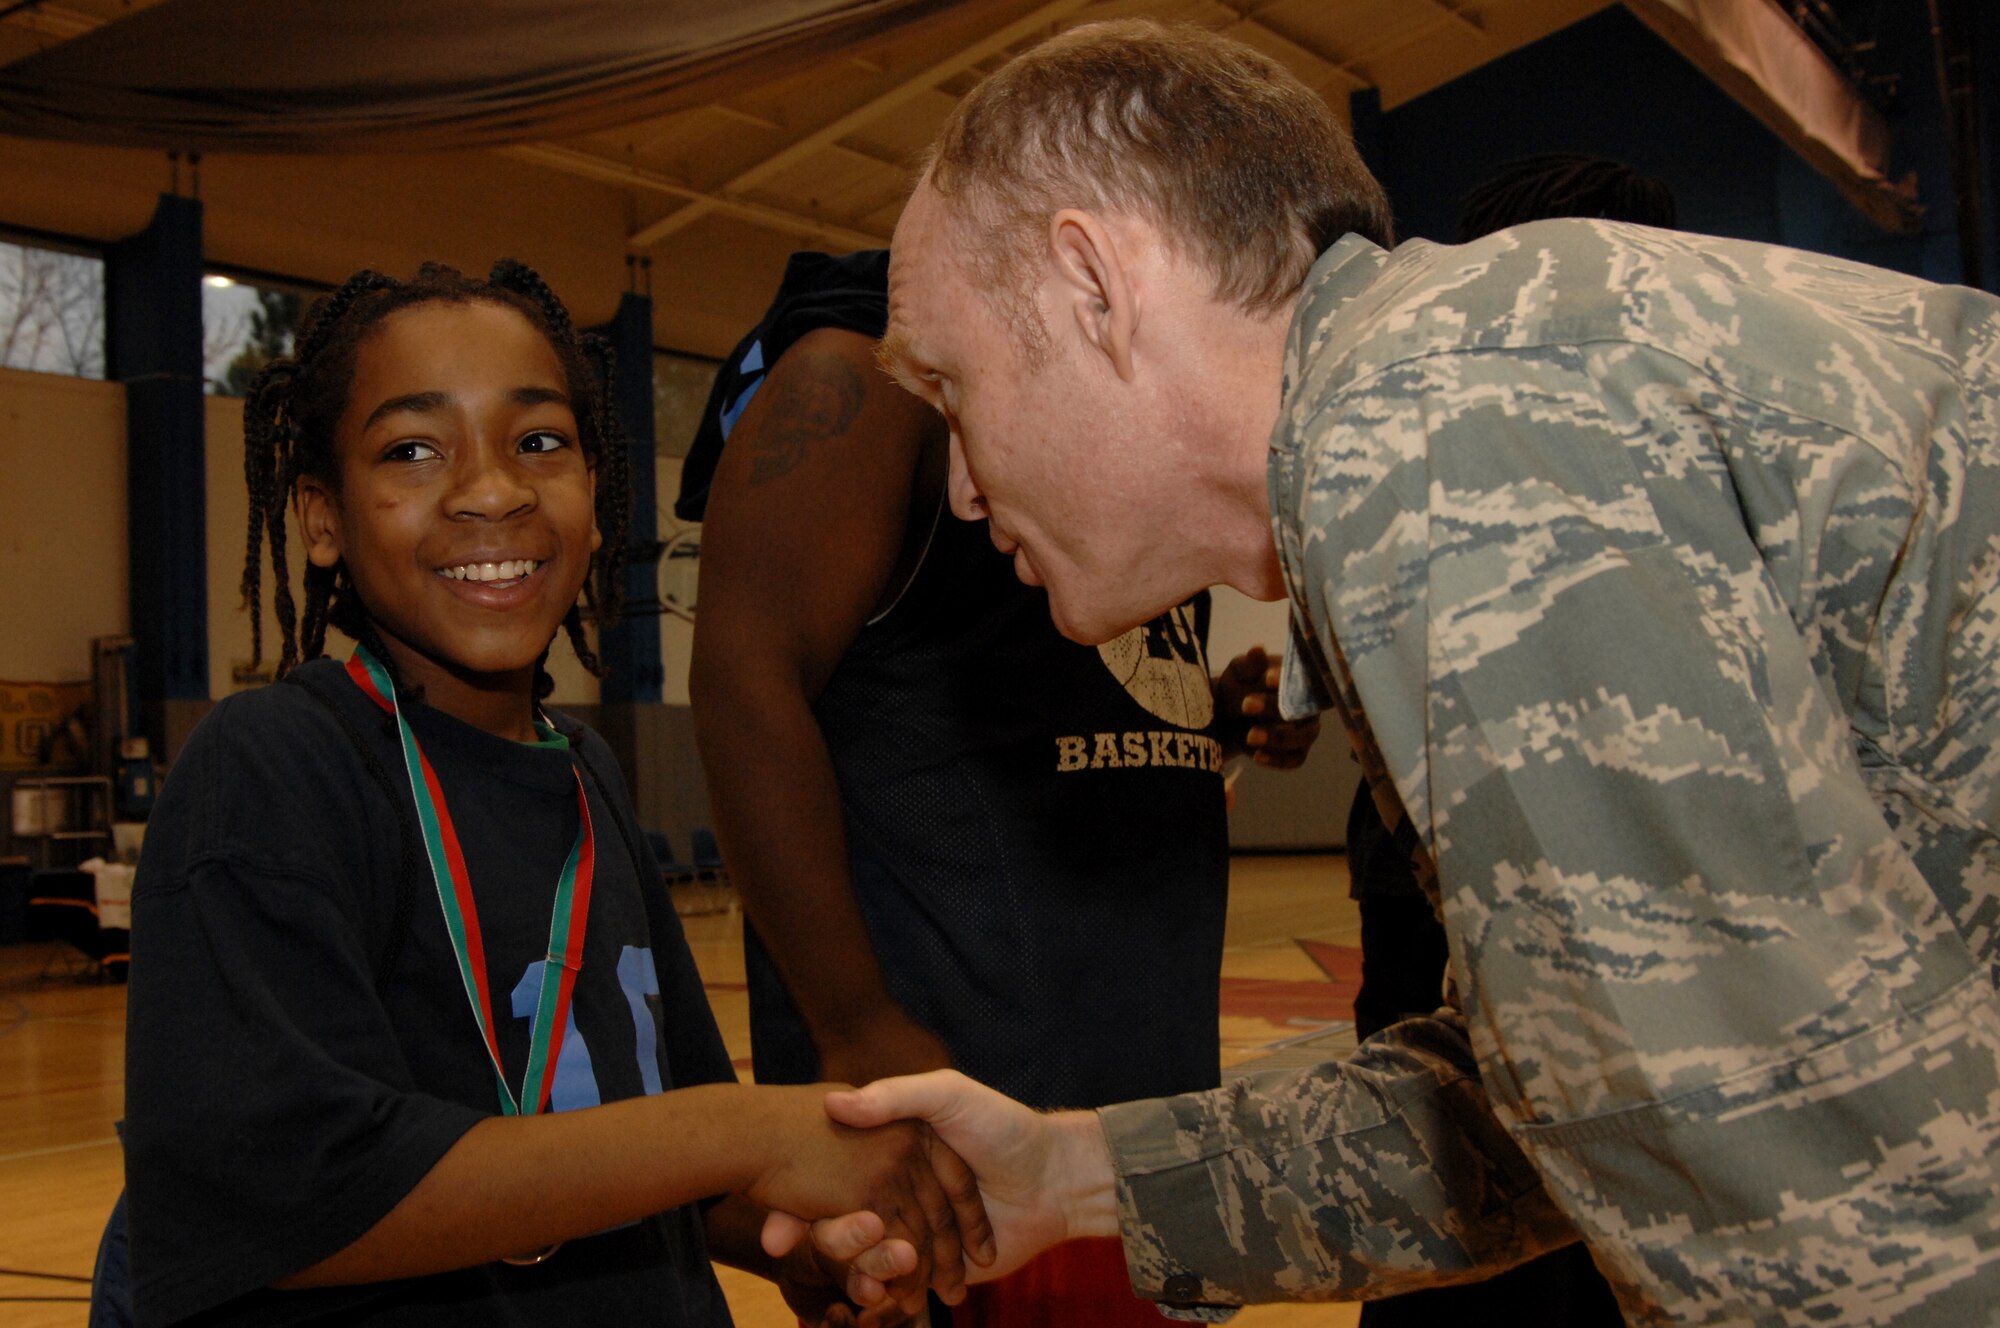 Col. Bill Porter, 96th Air Base Wing vice commander, shakes the hand of Amante Gice, Walton County Tivoli Cubs basketball team, during the Special Olympics Florida 2010 Northwest State Basketball Tournament at Hurlburt Field Feb. 6. More than 250 athletes from 10 counties in northwestern Florida participated in this year's games. (U.S. Air Force photo by Senior Airman Matthew Loken)